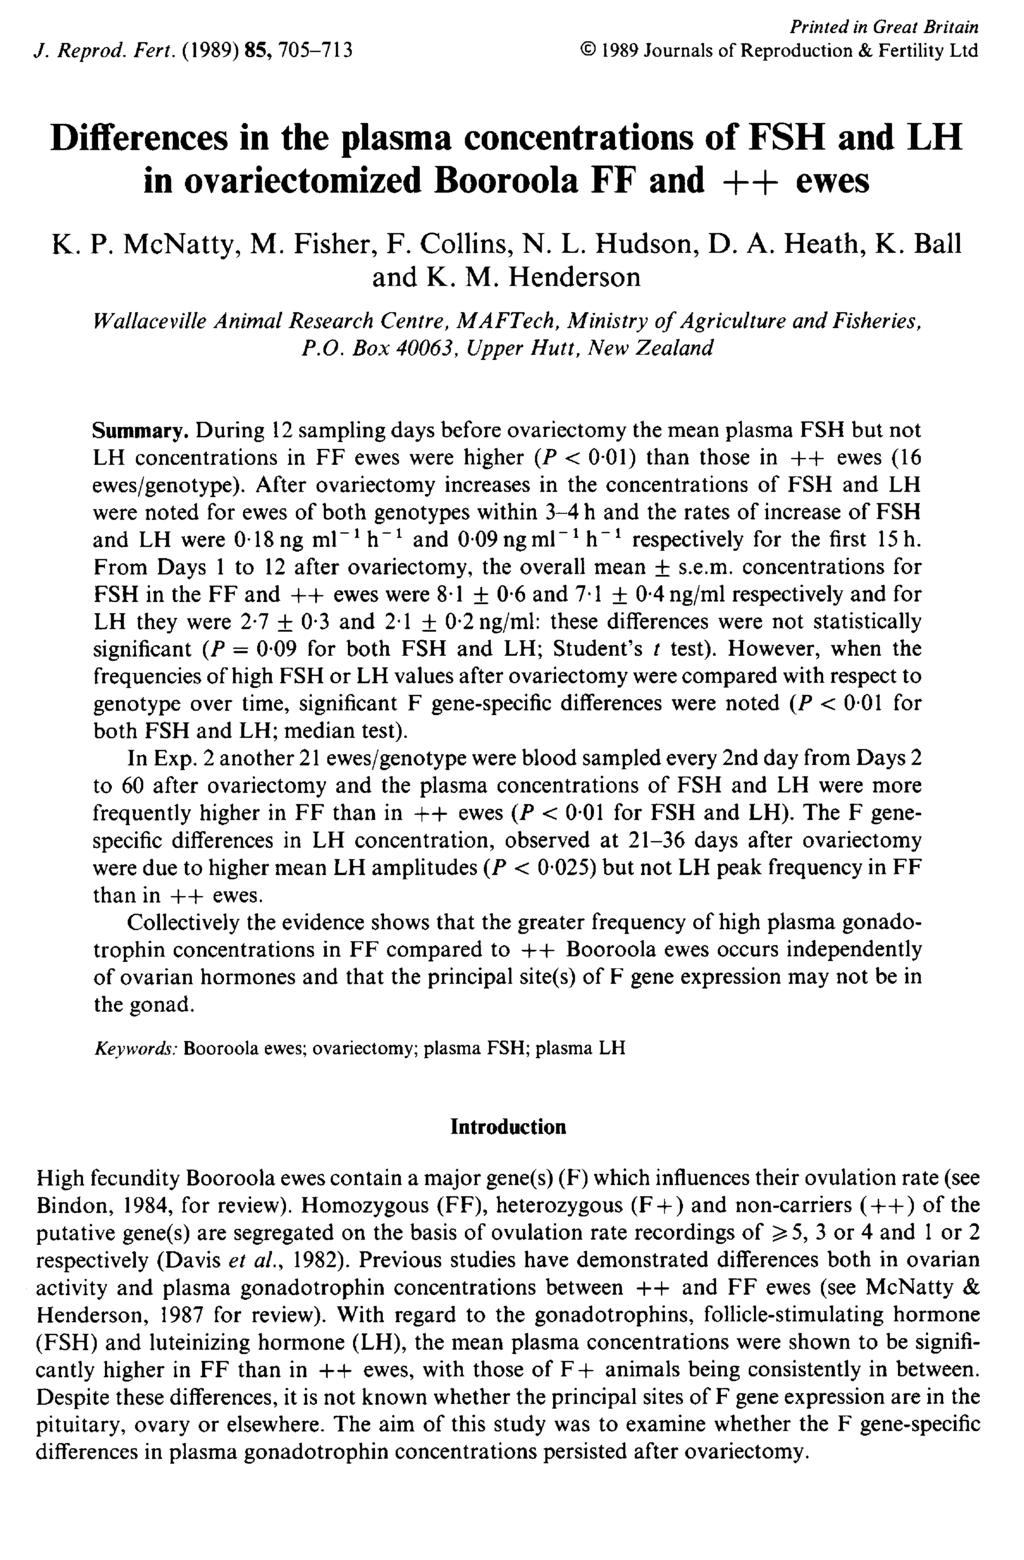 Differences in the plasma concentrations of FSH and LH in ovariectomized Booroola FF and ++ ewes K. P. Mc